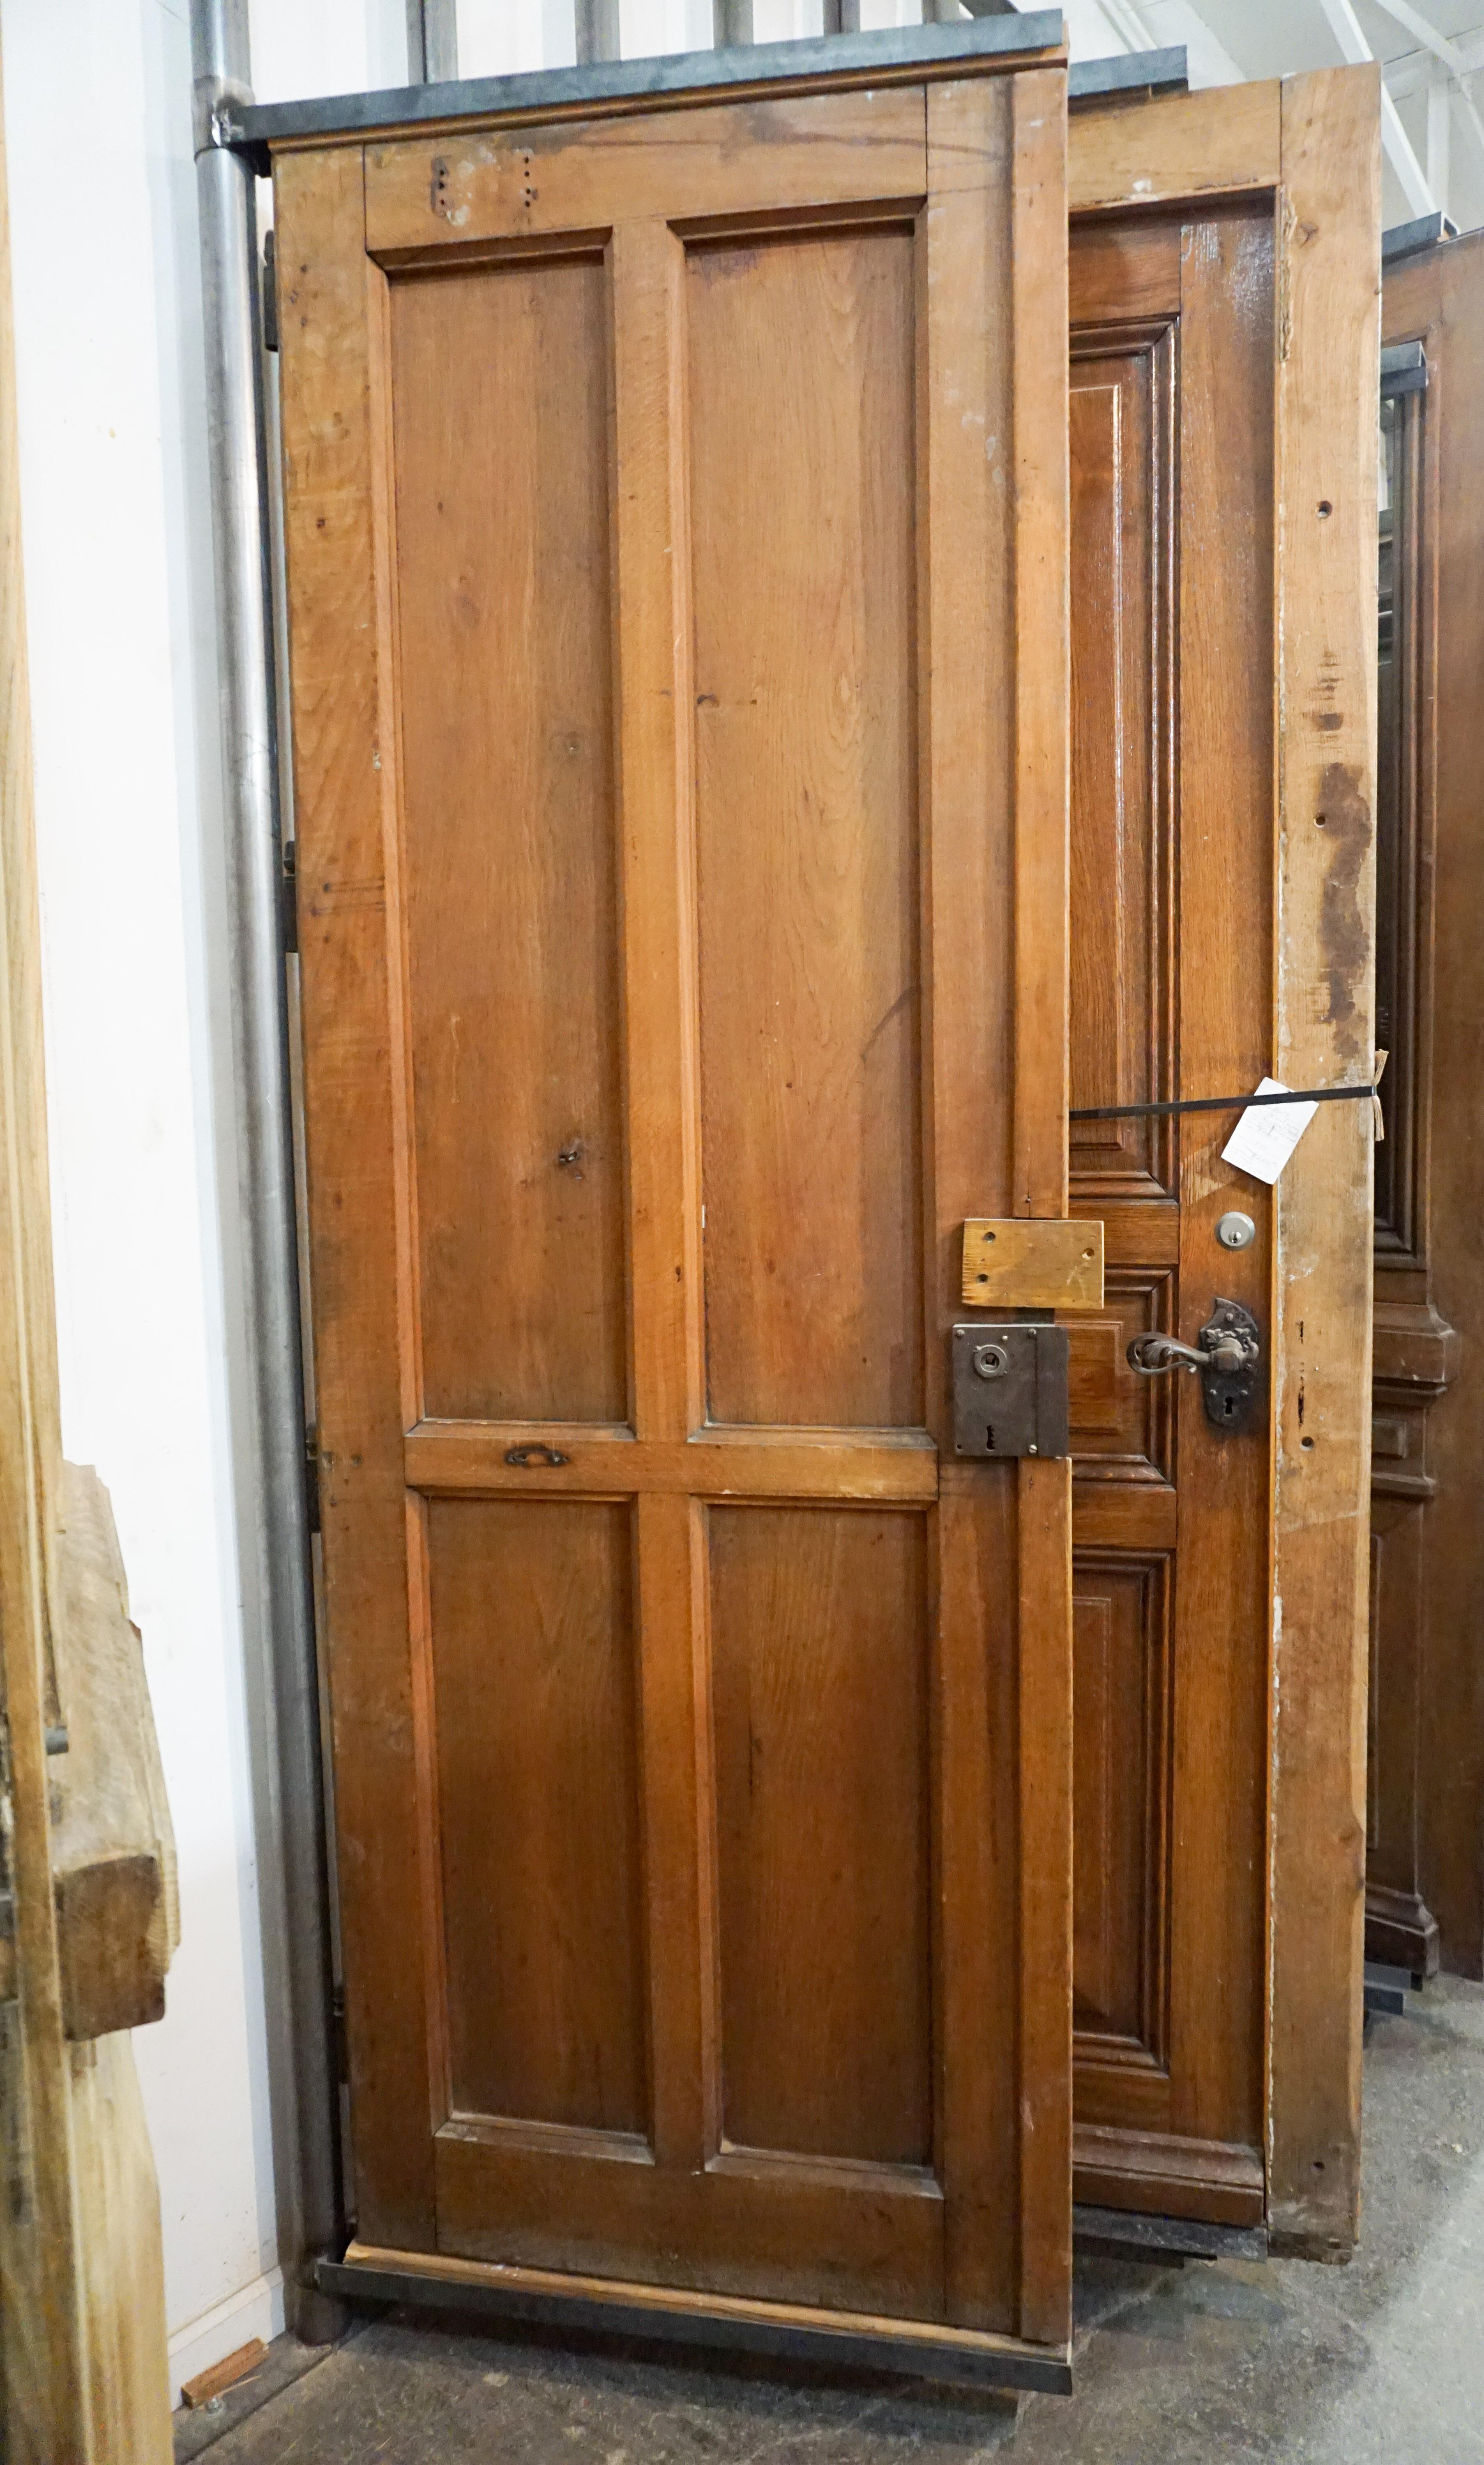 French double door set. Picture shows only one but we have both in stock. Features four rectangular panels.

Origin: France, circa 1850

Measurements: 66 3/4